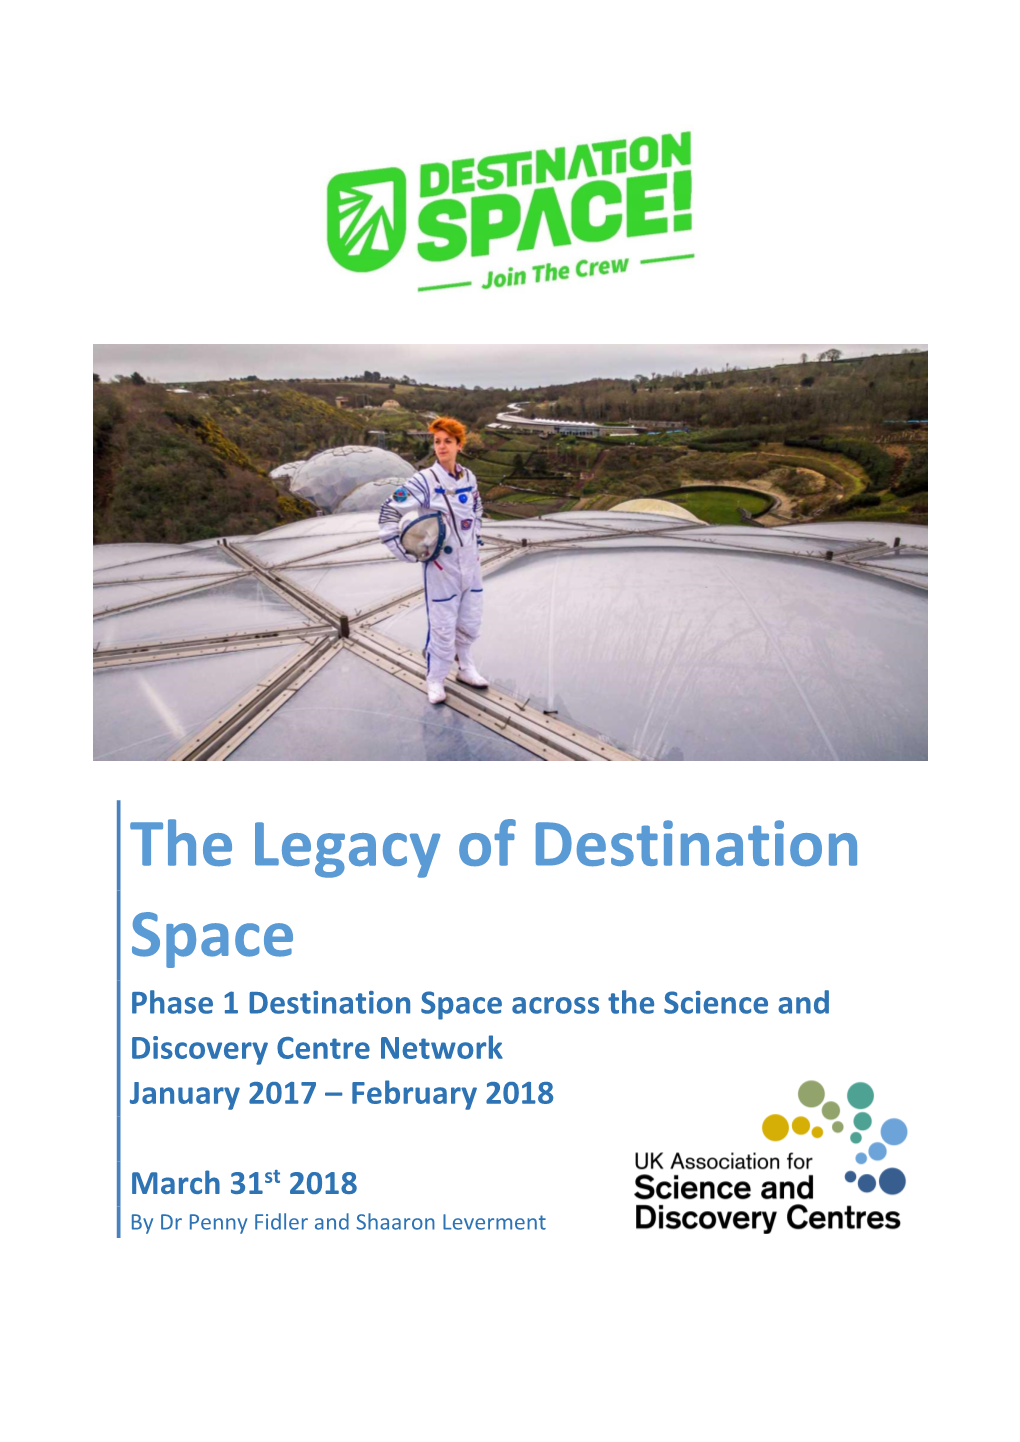 The Legacy of Destination Space Phase 1 Destination Space Across the Science and Discovery Centre Network January 2017 – February 2018